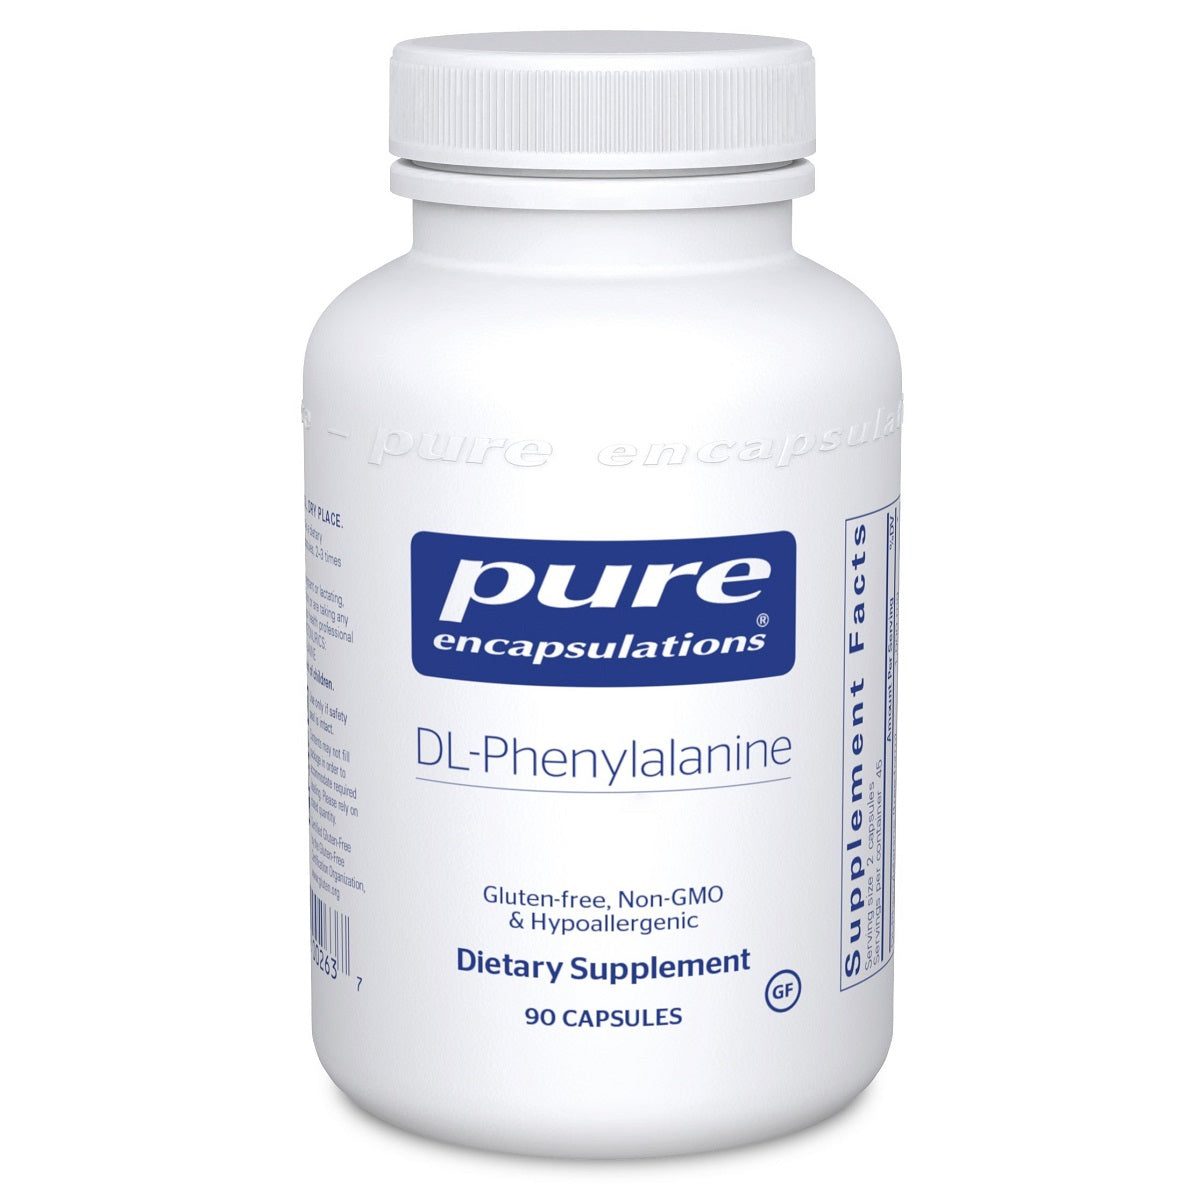 Image of Pure Encapsulations, DL-Phenylalanine 90 and 180 Capsules